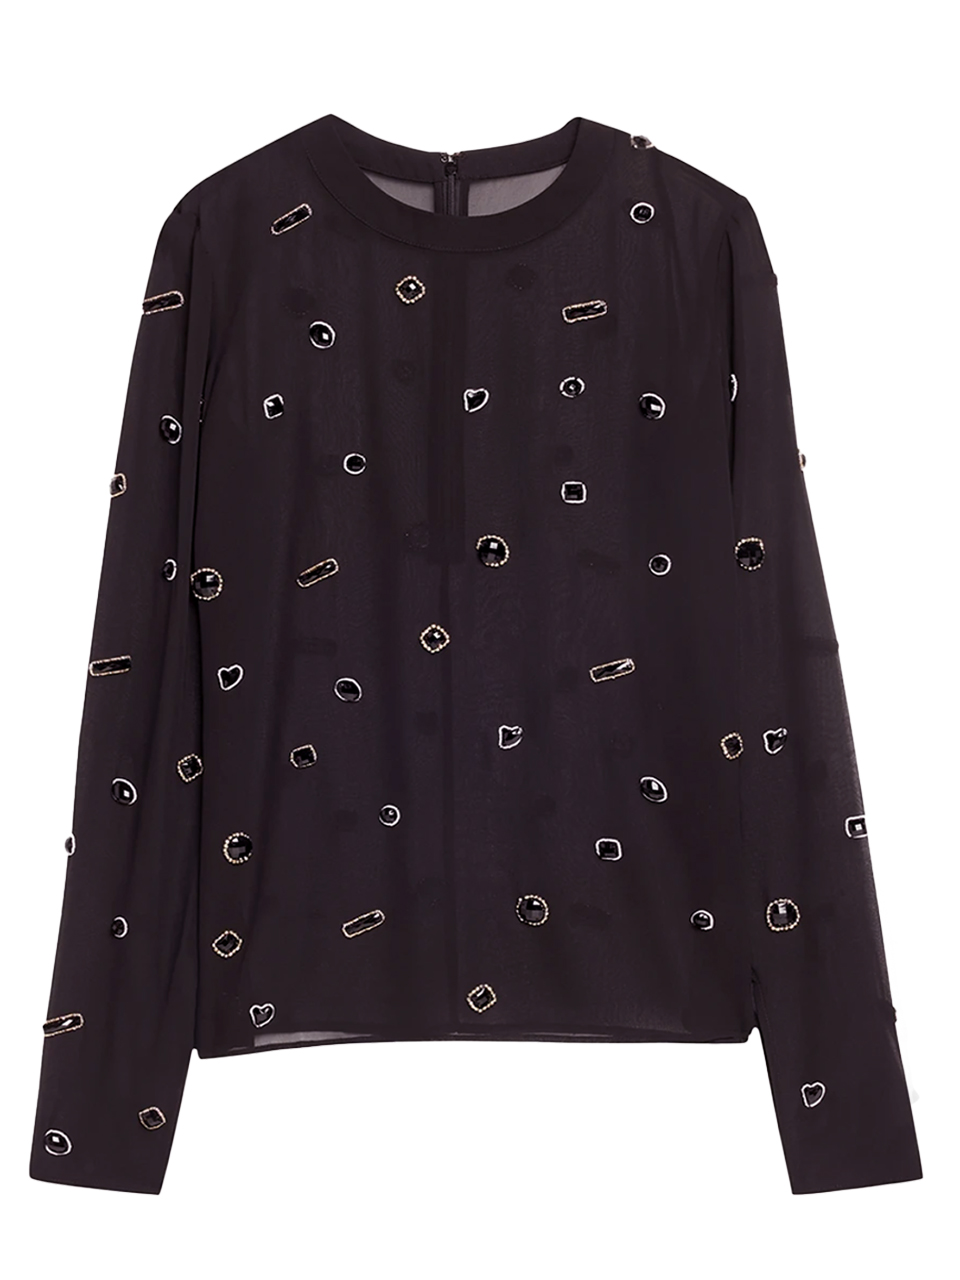 3.1 Phillip Lim Halo Embroidered Chiffon Long Sleeve Top in Black Product Shot 